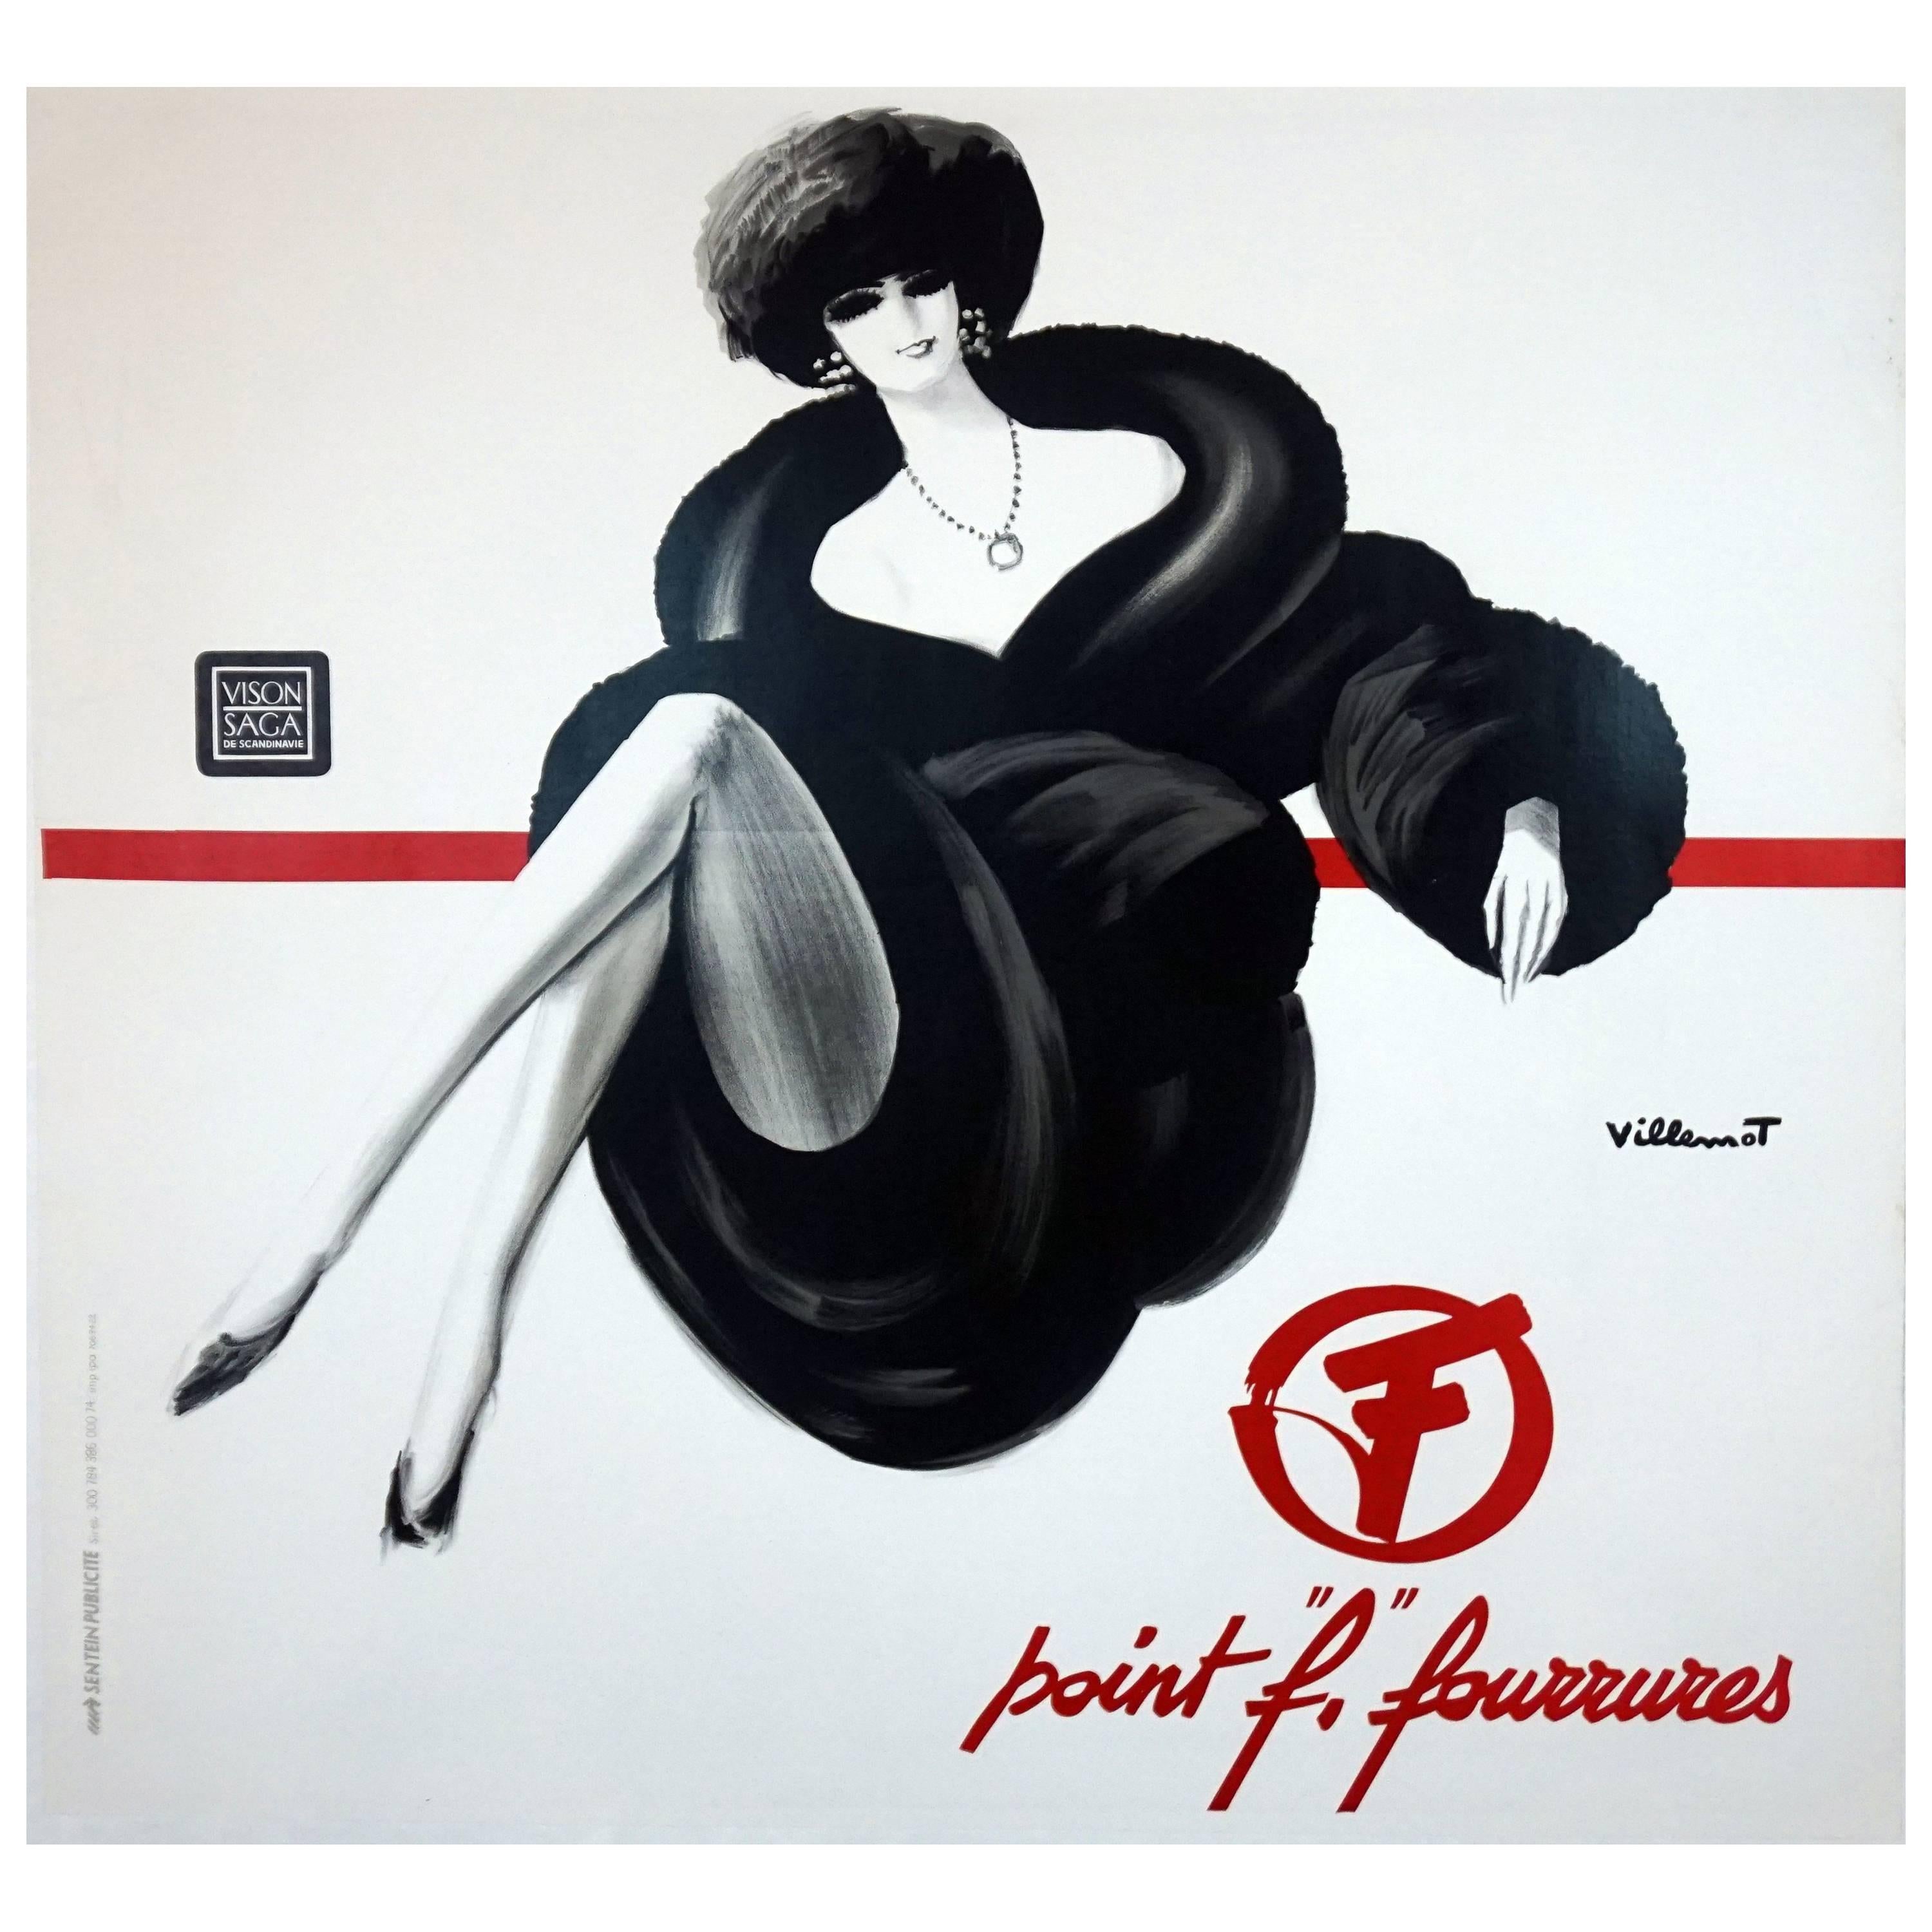 Point F. Fourrures advertising poster by Villemot For Sale